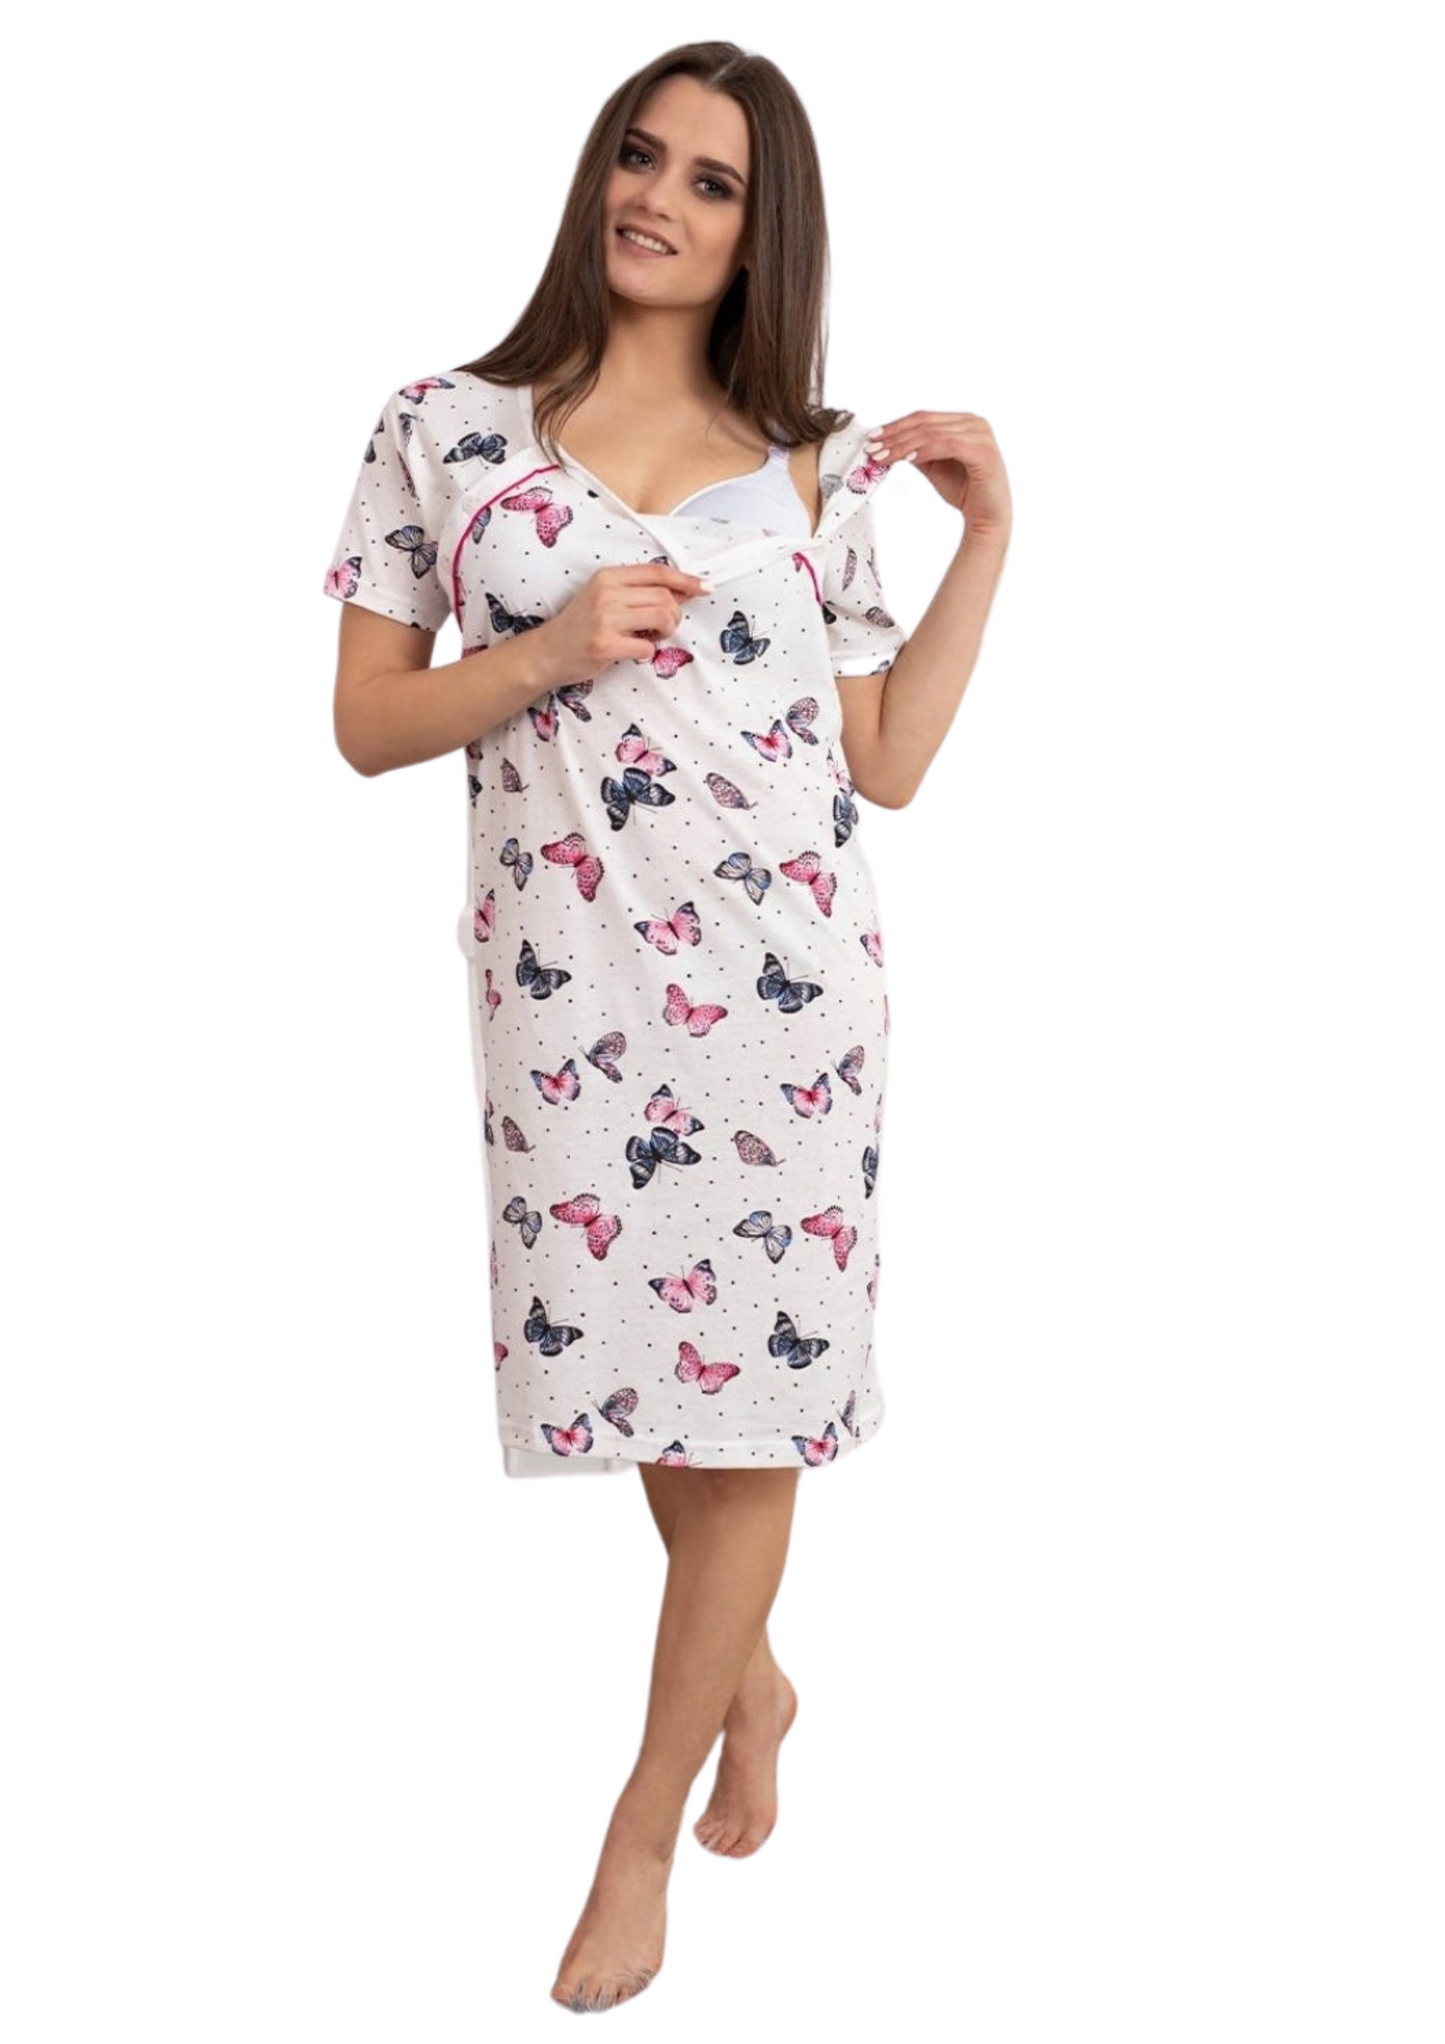 Nightgown with butterflies (maternity/nursing)